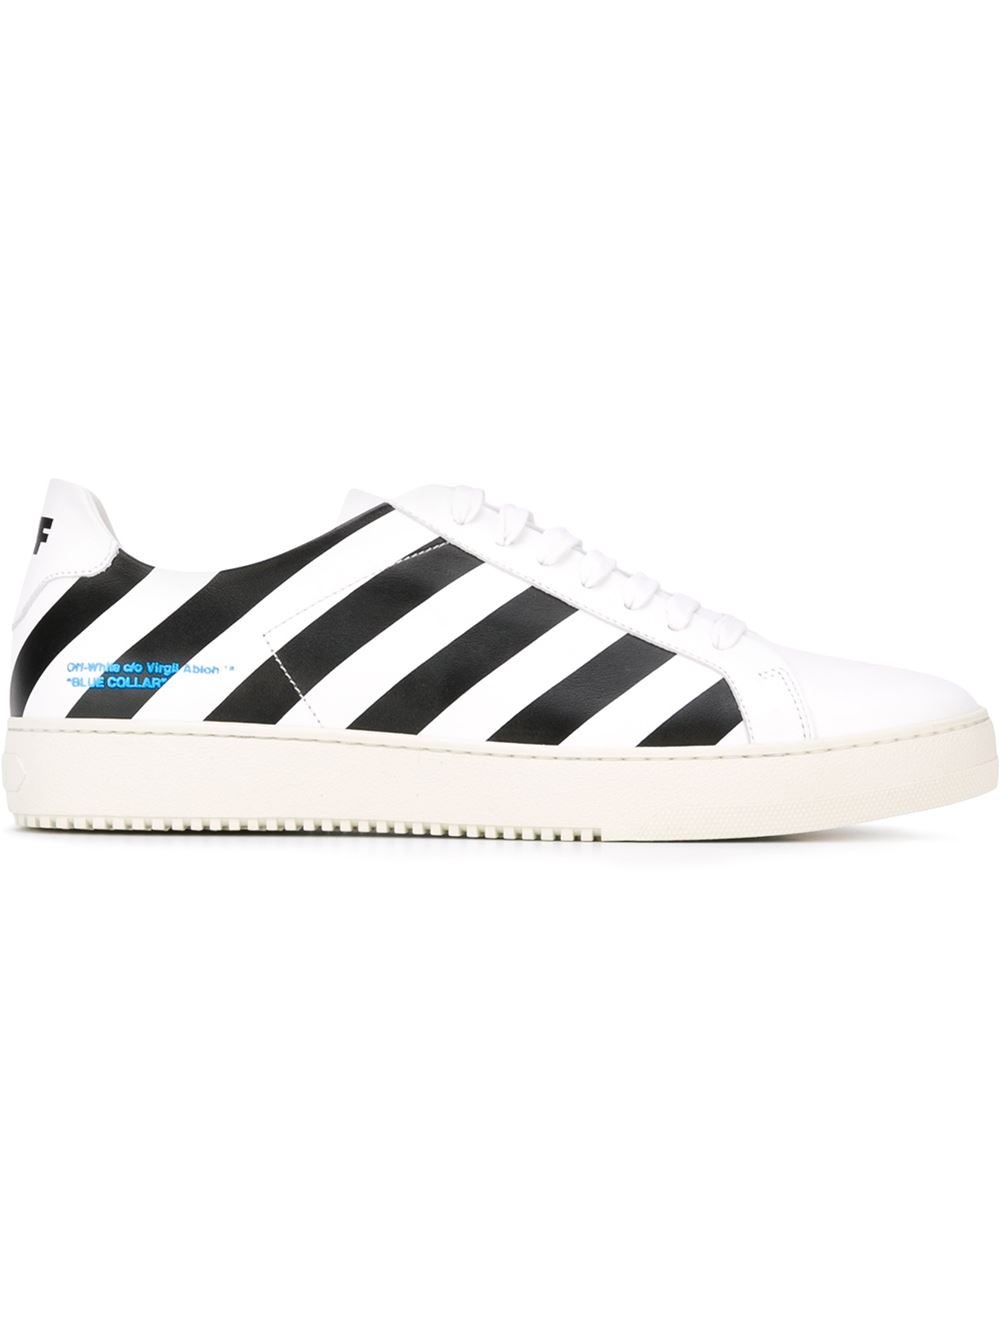 Off-White diagonal stripe sneakers Men Shoes Trainers